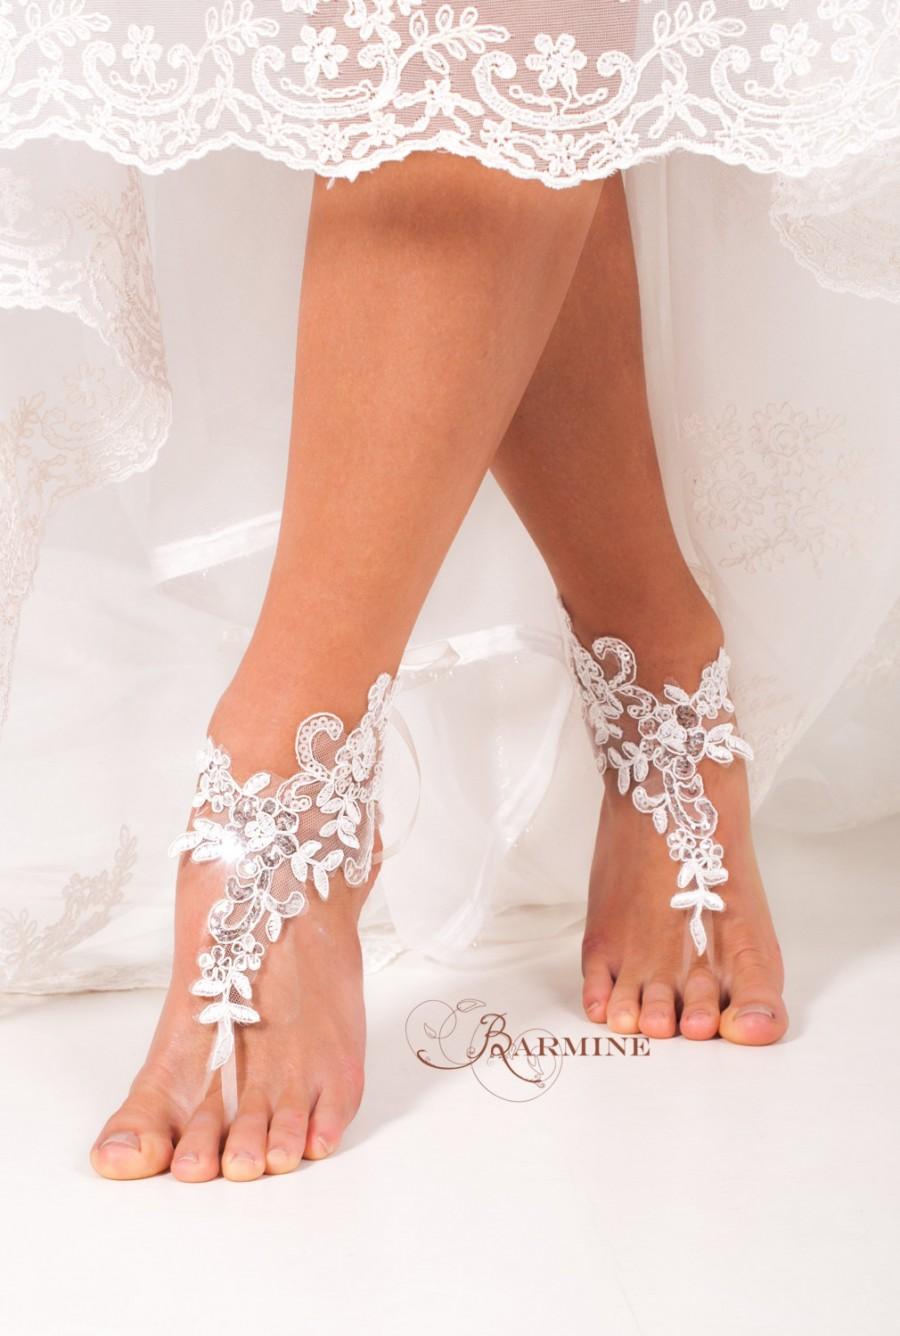 Lace Barefoot Sandals Bridal Footless Sandals Bridal Shoes